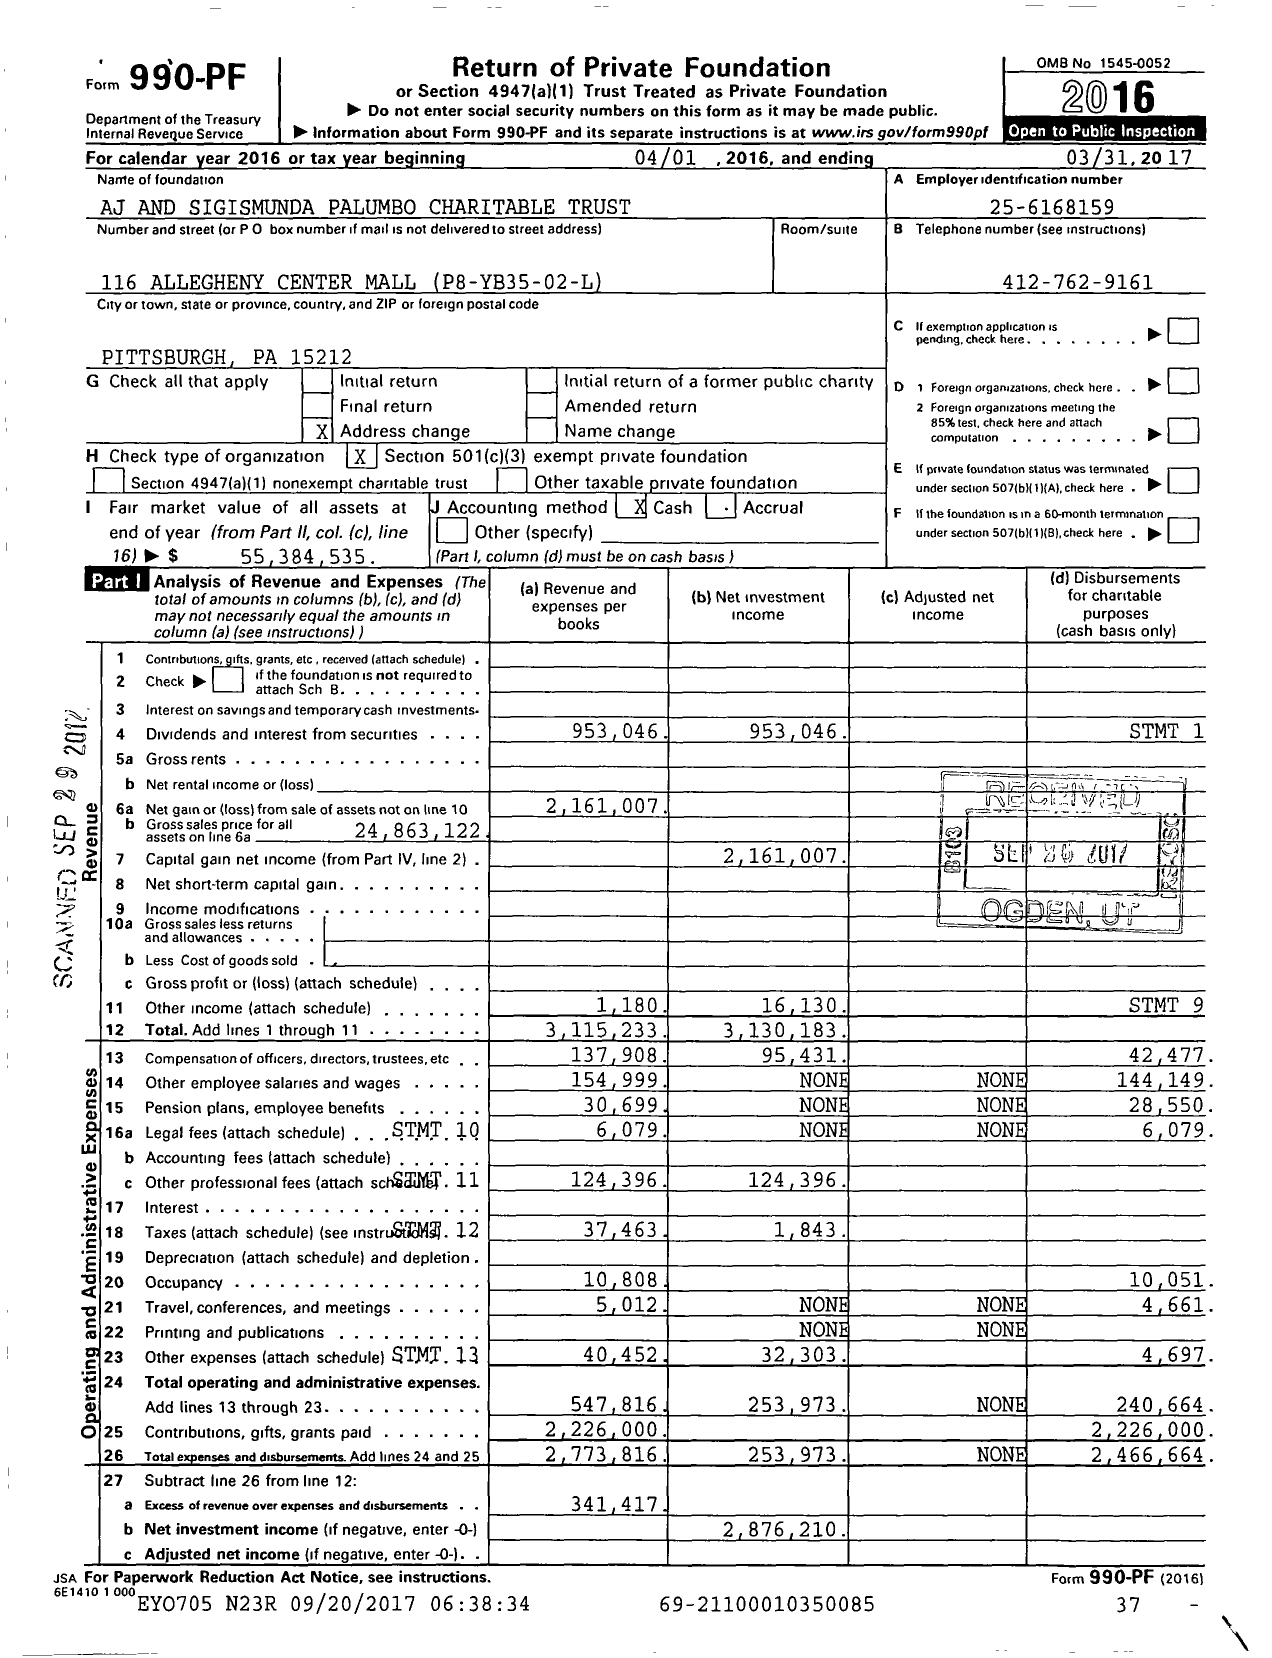 Image of first page of 2016 Form 990PF for Aj and Sigismunda Palumbo Charitable Trust